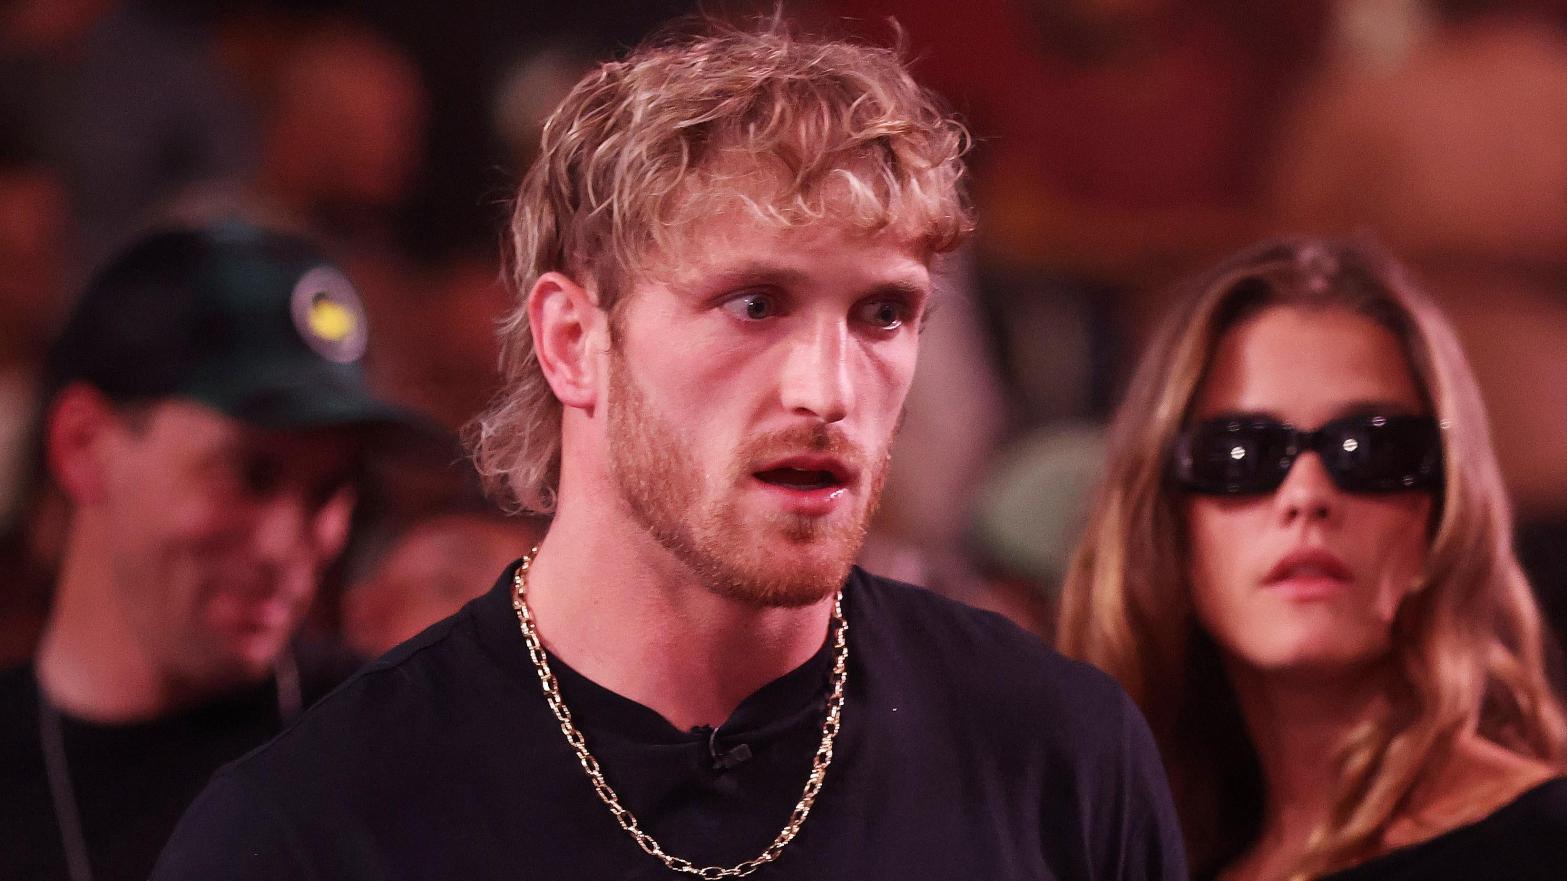 Logan Paul's CryptoZoo was a blockchain-based game where users could buy in game eggs to hatch into hybrid animals.  (Image: Christian Petersen, Getty Images)